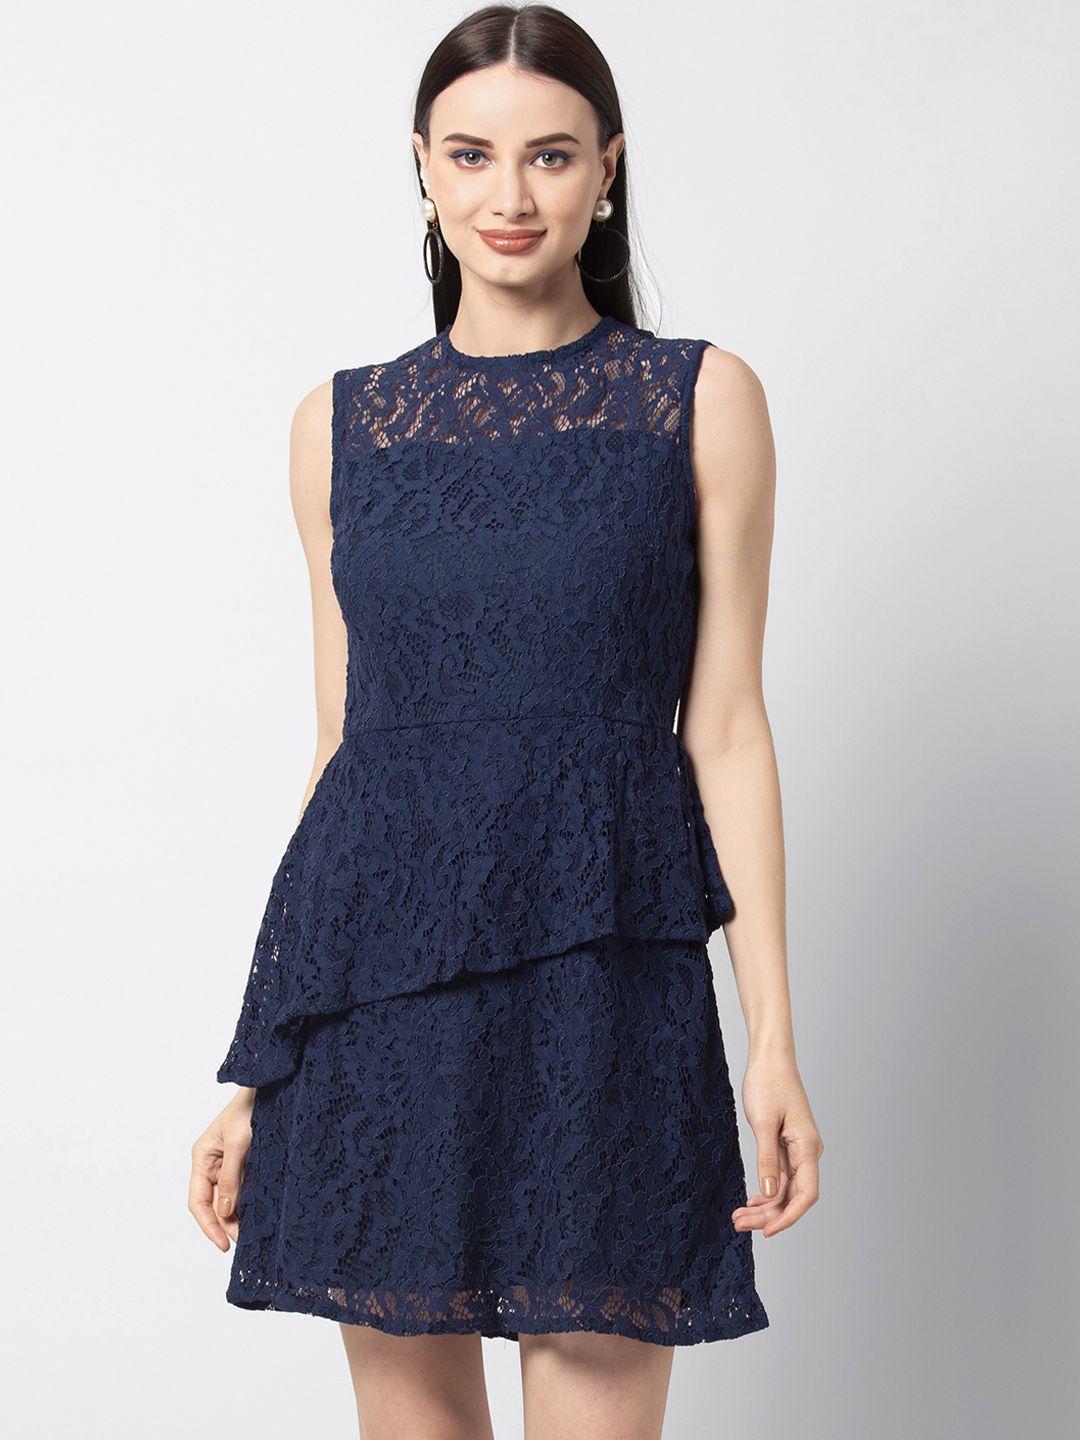 faballey women navy blue self design lace insert fit and flare dress